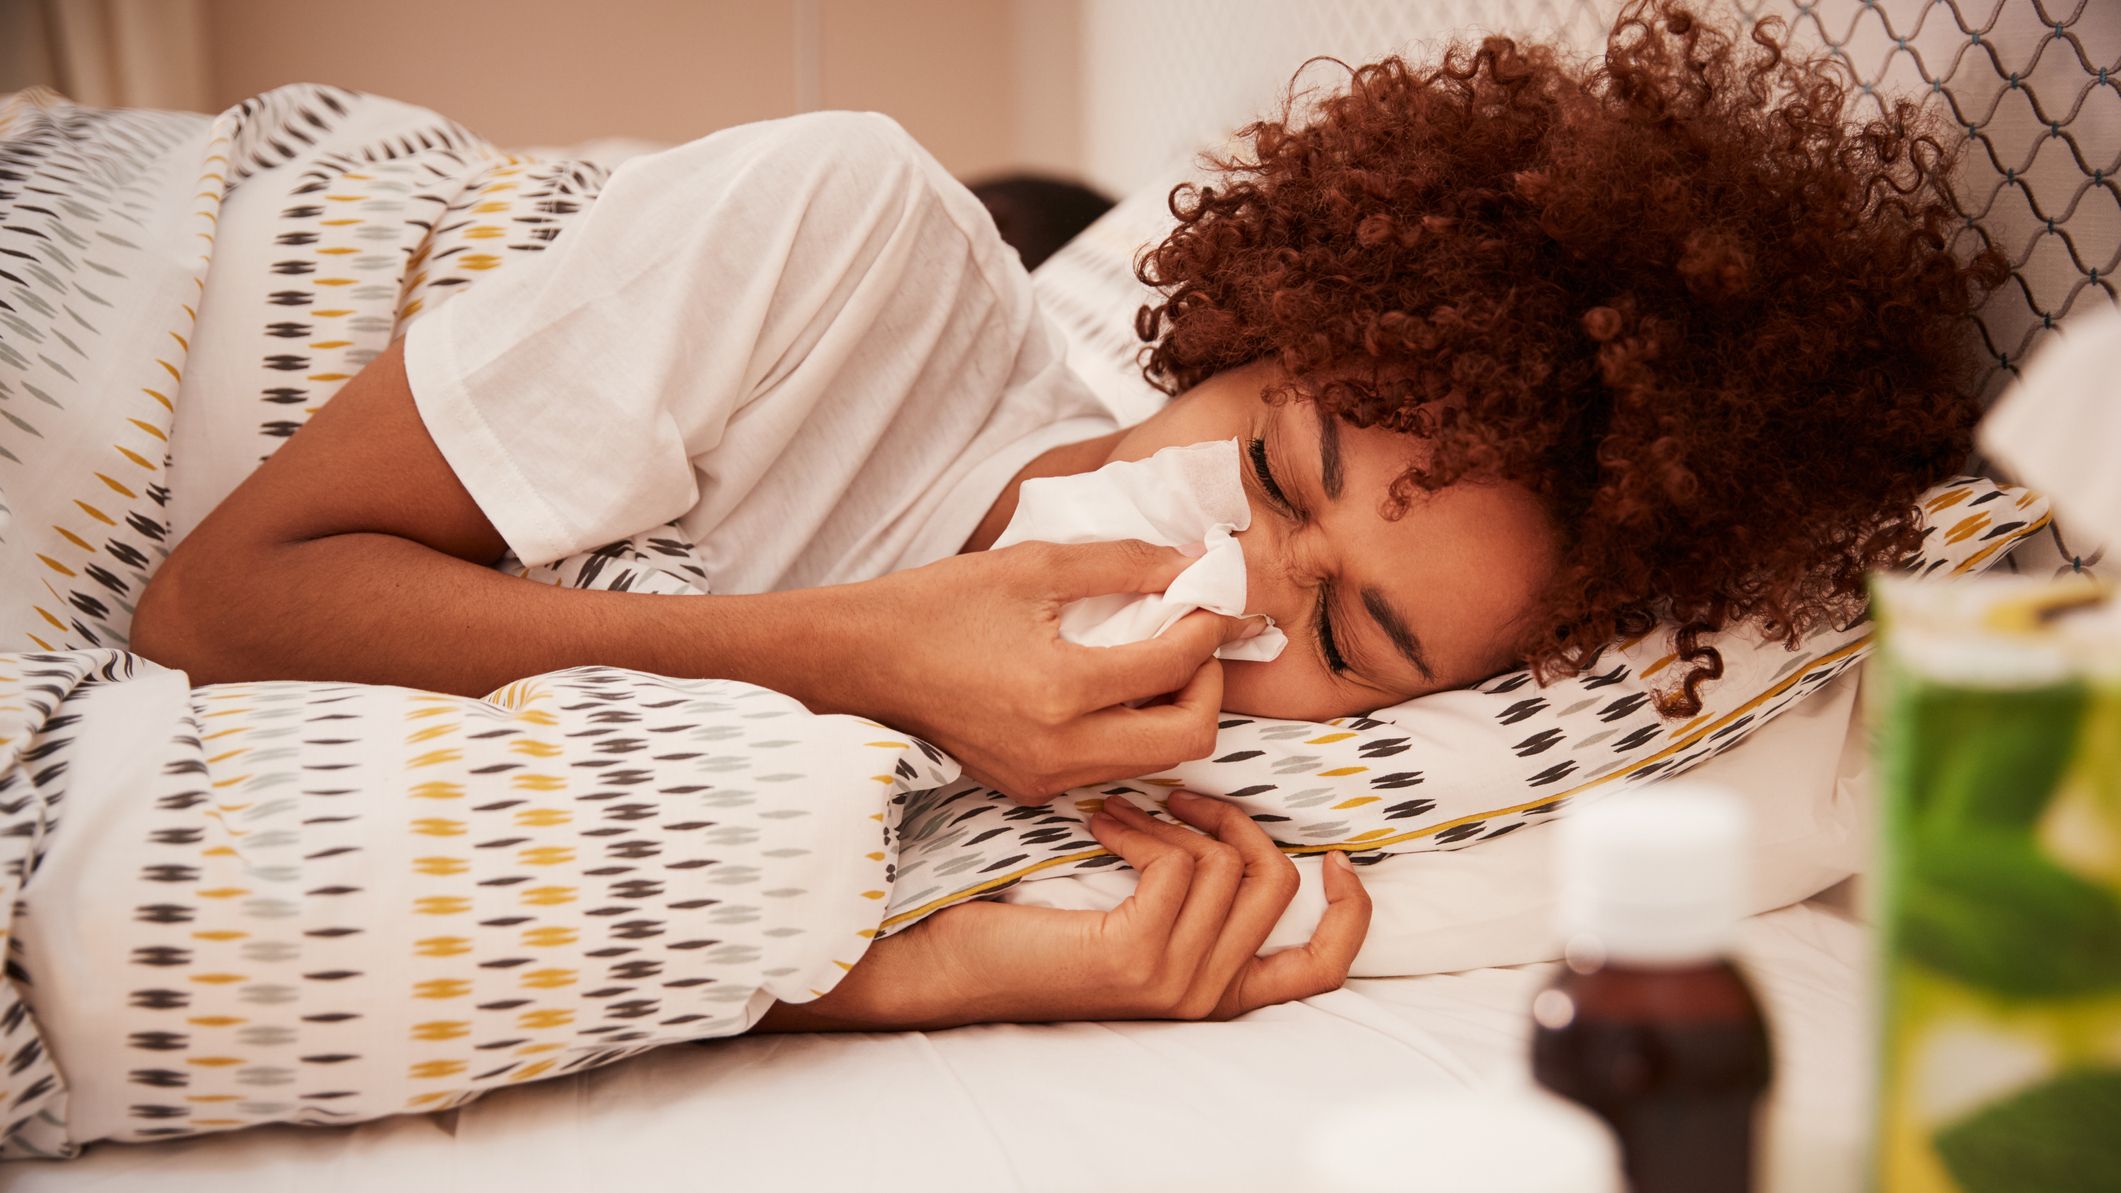 How to Prevent a Cold: 13 Ways to Stop a Cold & Avoid Getting Sick